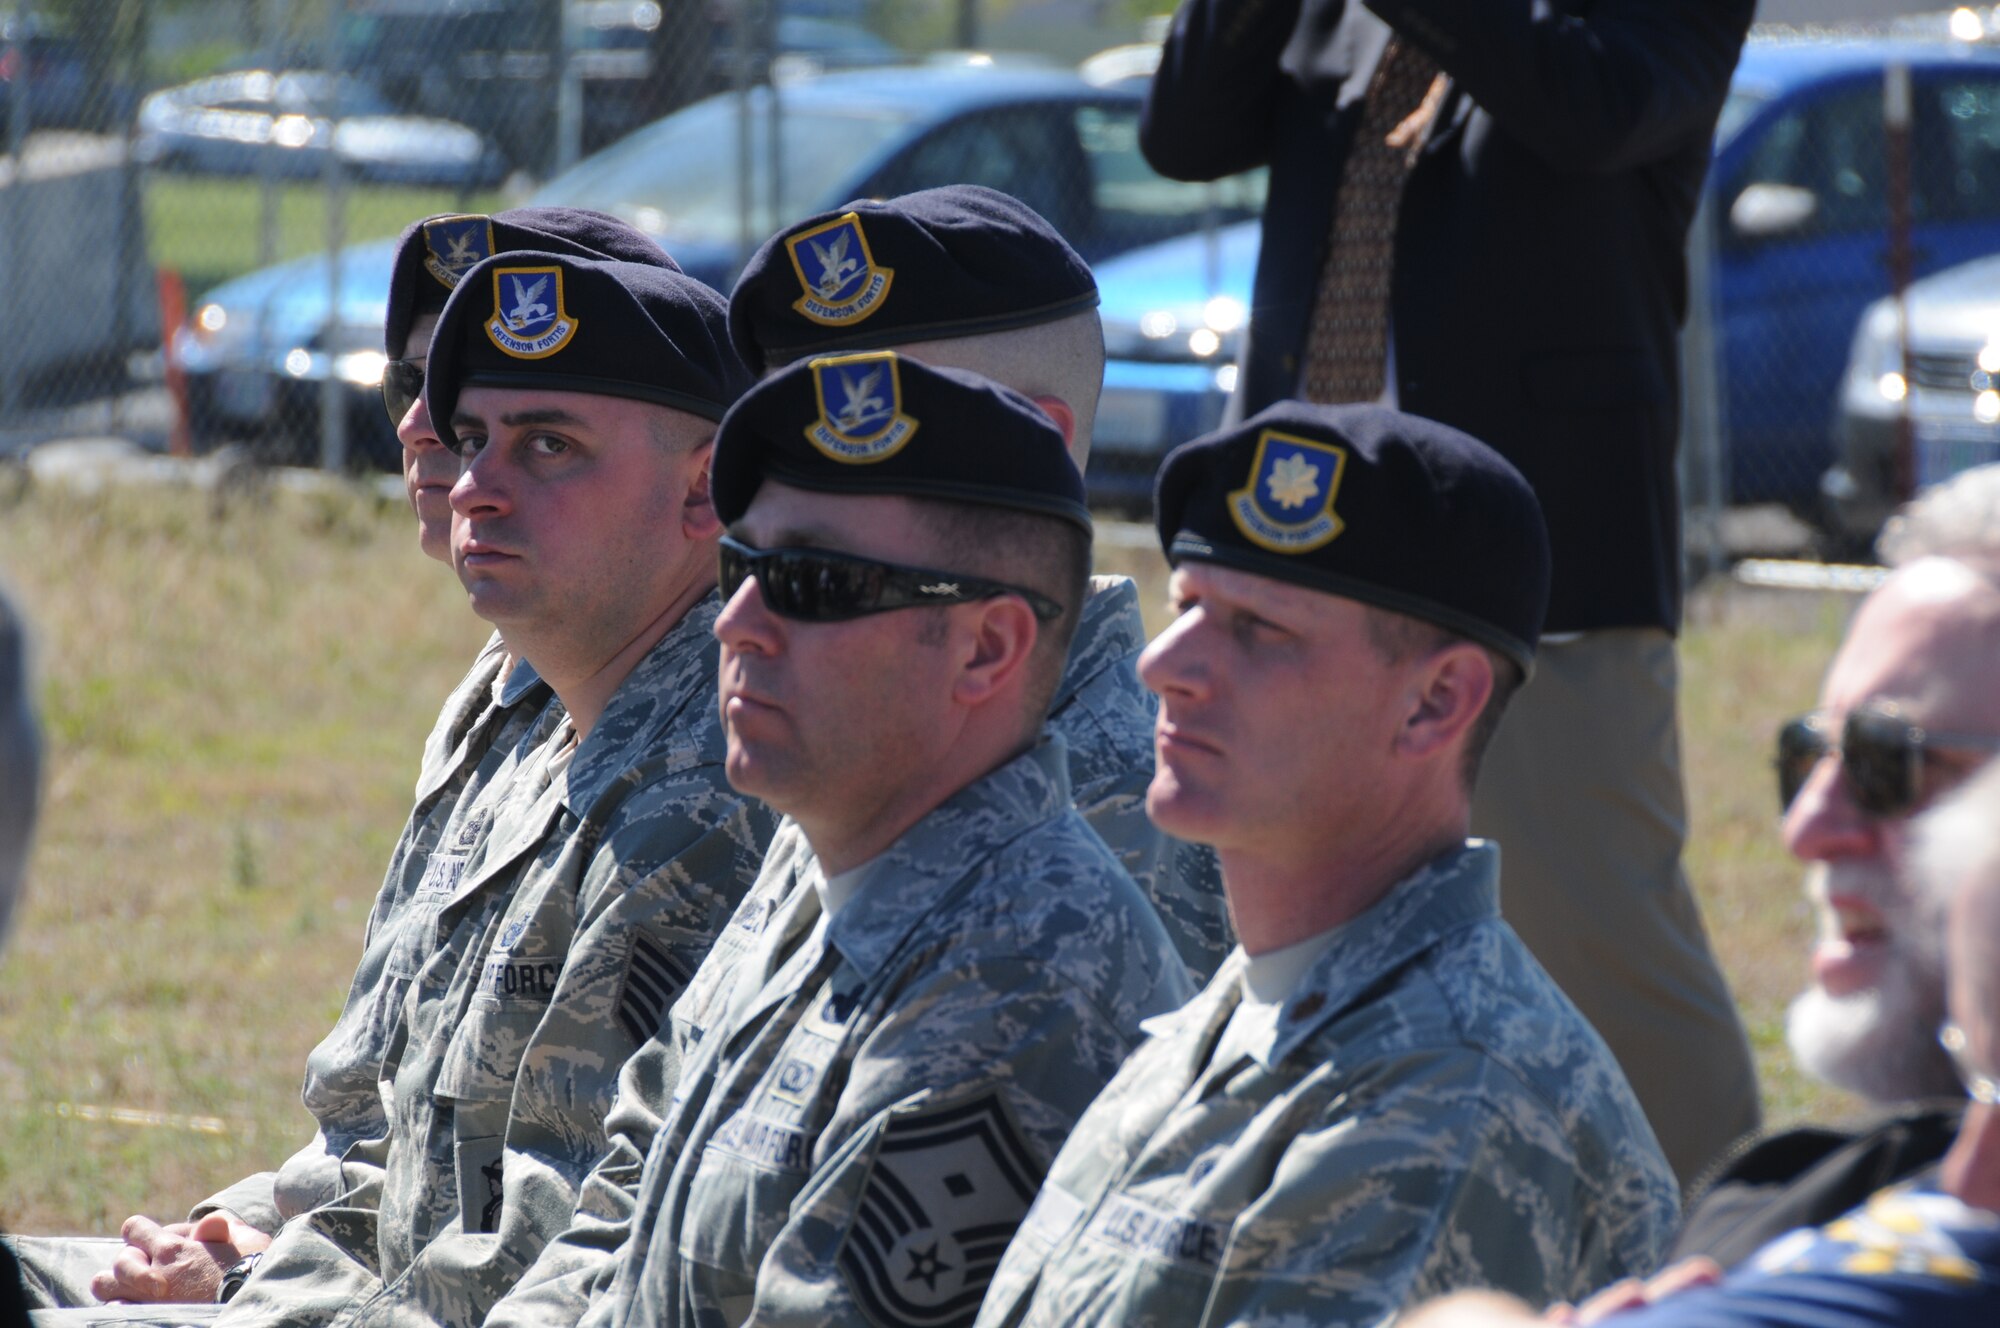 Members of the 173rd Security Forces Squadron listen during the ground breaking ceremony for the Joint Armed Forces Reserve Center (JAFRC) June 9, 2011 at Kingsley Field, Klamath Falls, Ore.  When completed the building will house the 173rd Security Forces Squadron and Charlie Troop, 1-82nd Cavalry, Oregon Army National Guard.  (U.S. Air Force Photo by Tech. Sgt Jennifer Shirar) RELEASED